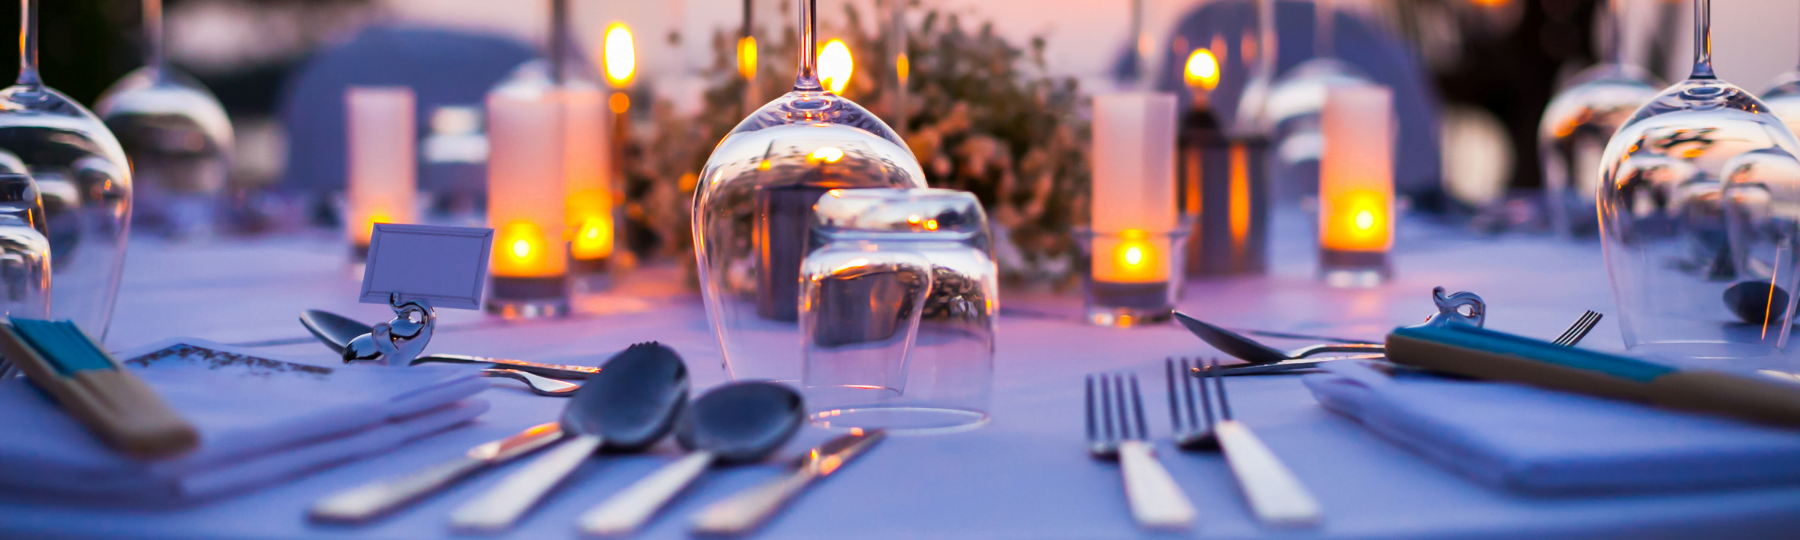 Formal Dinner Parties 8 Simple Etiquette Tips | A Delightful Bitefull Catering